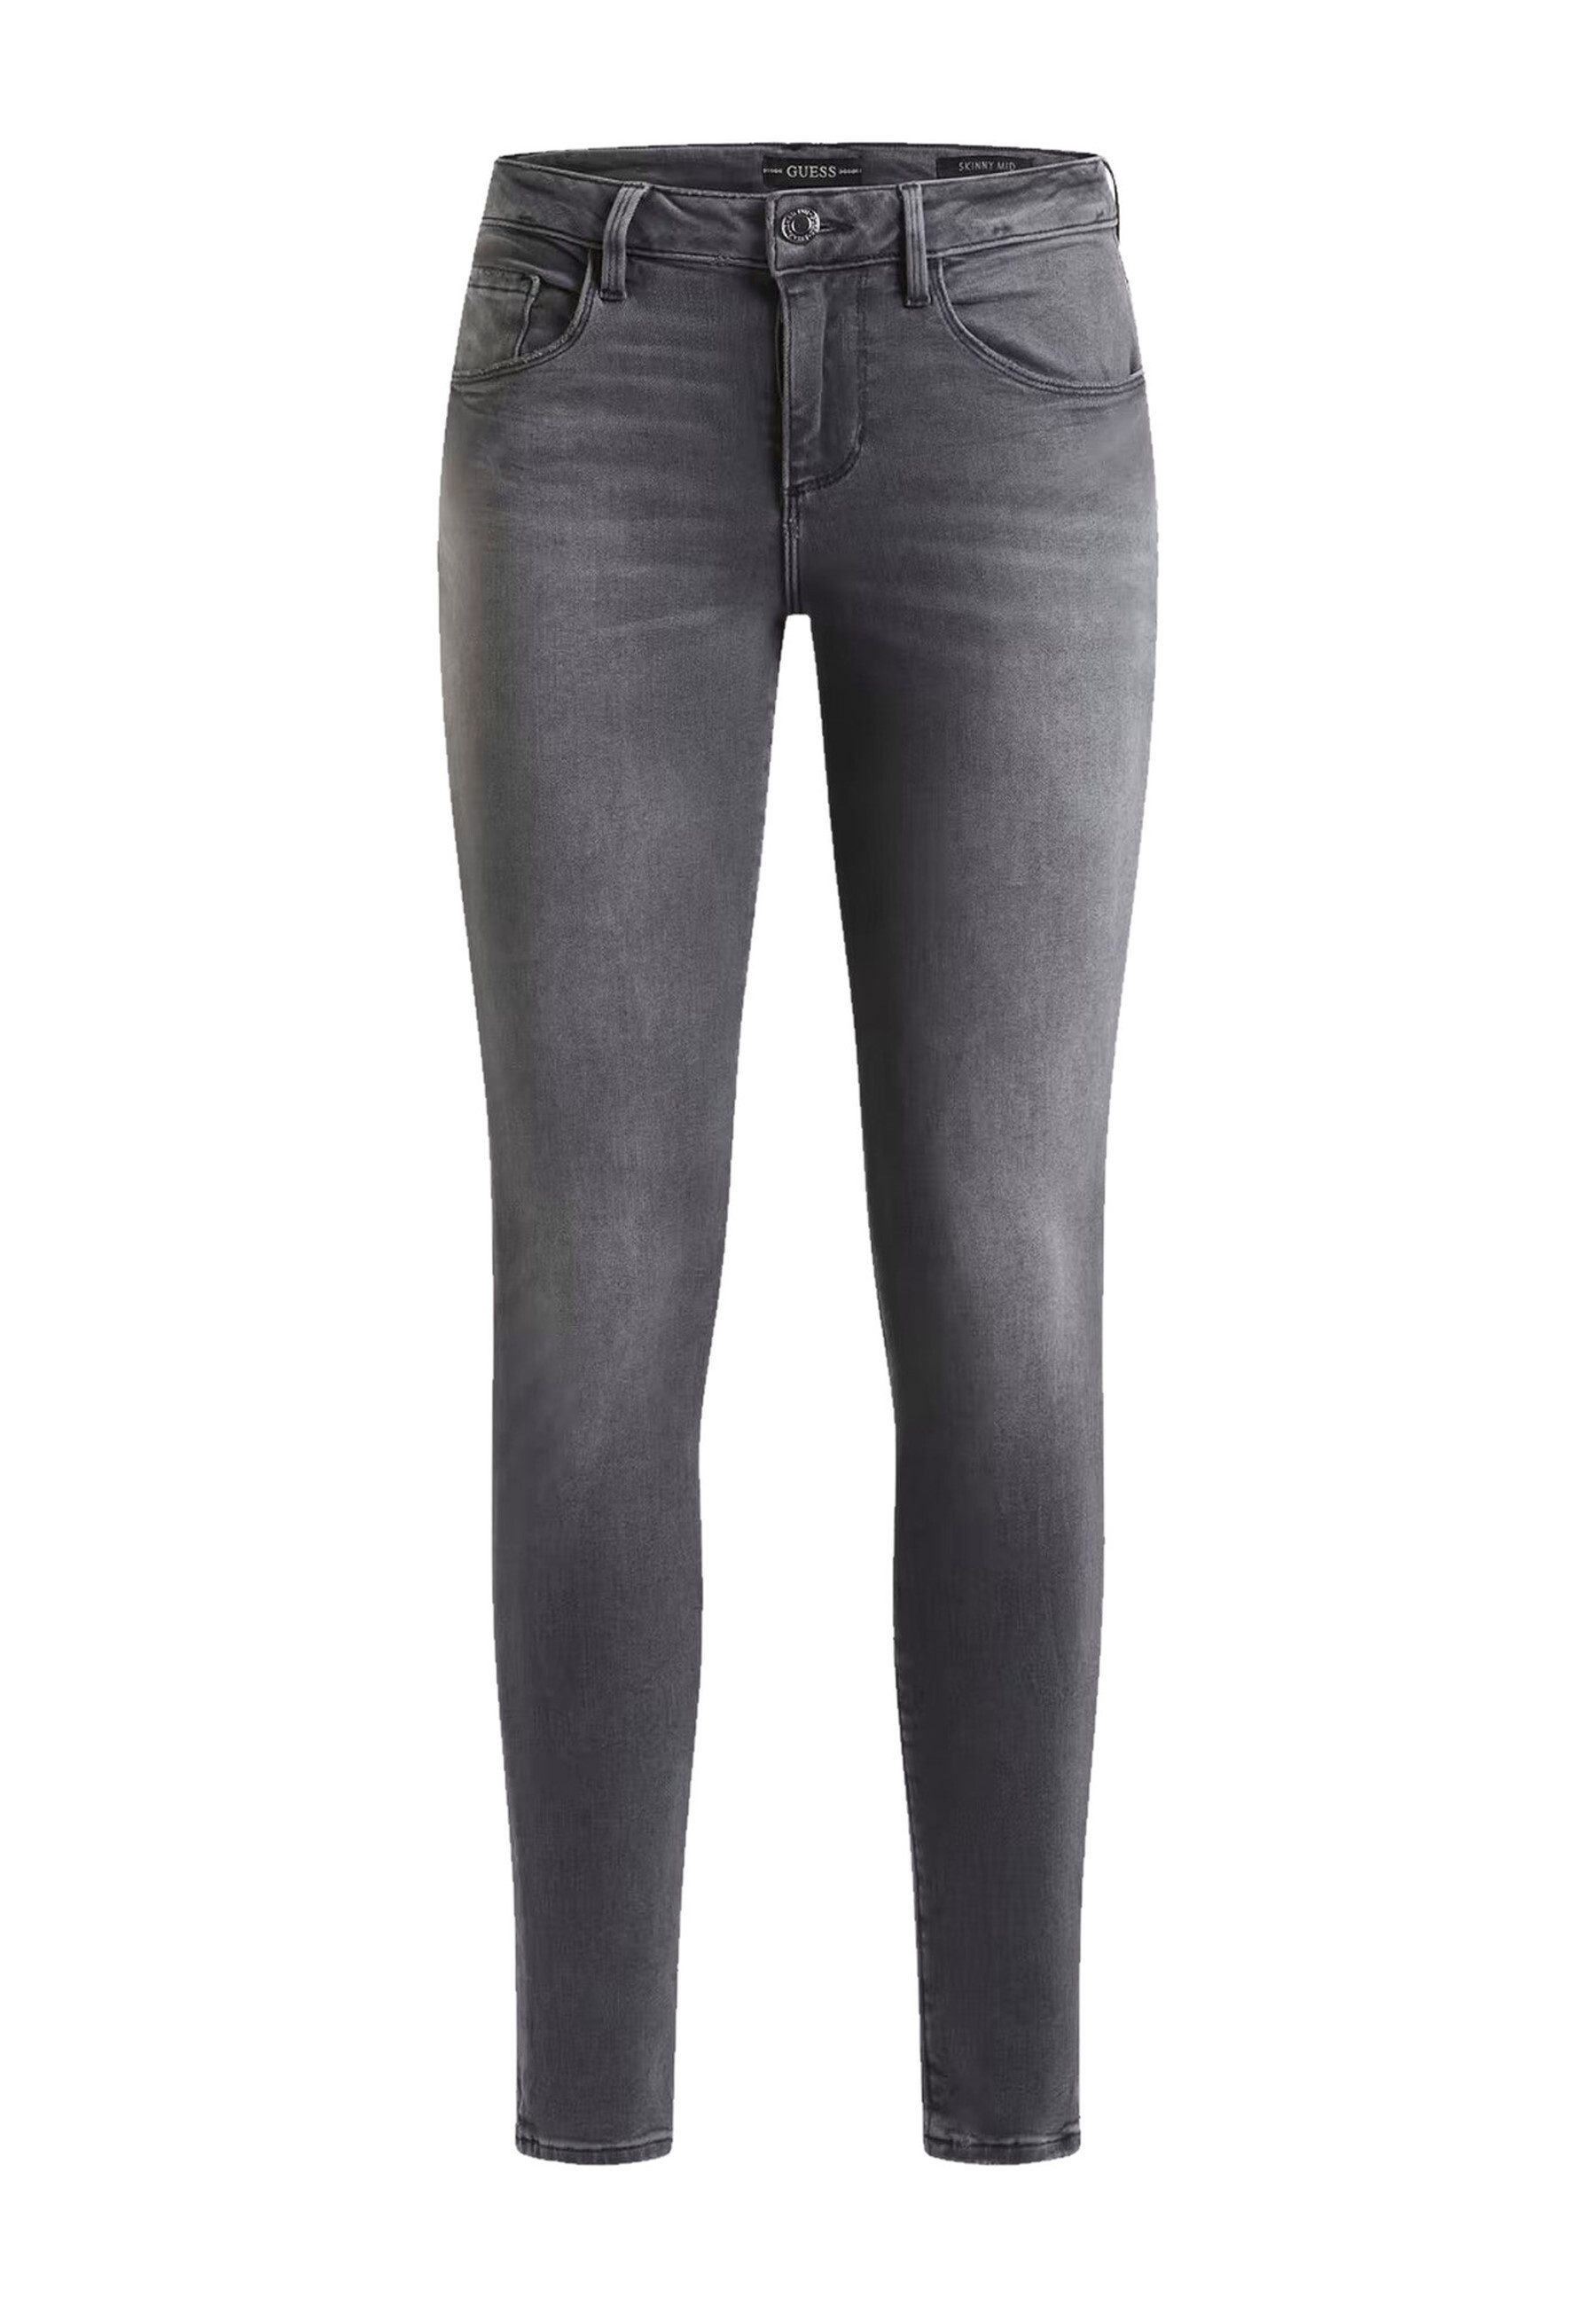 Guess 5-Pocket-Jeans Jeans Skinny-Fit-Jeans ANNETTE mit Label-Patch im